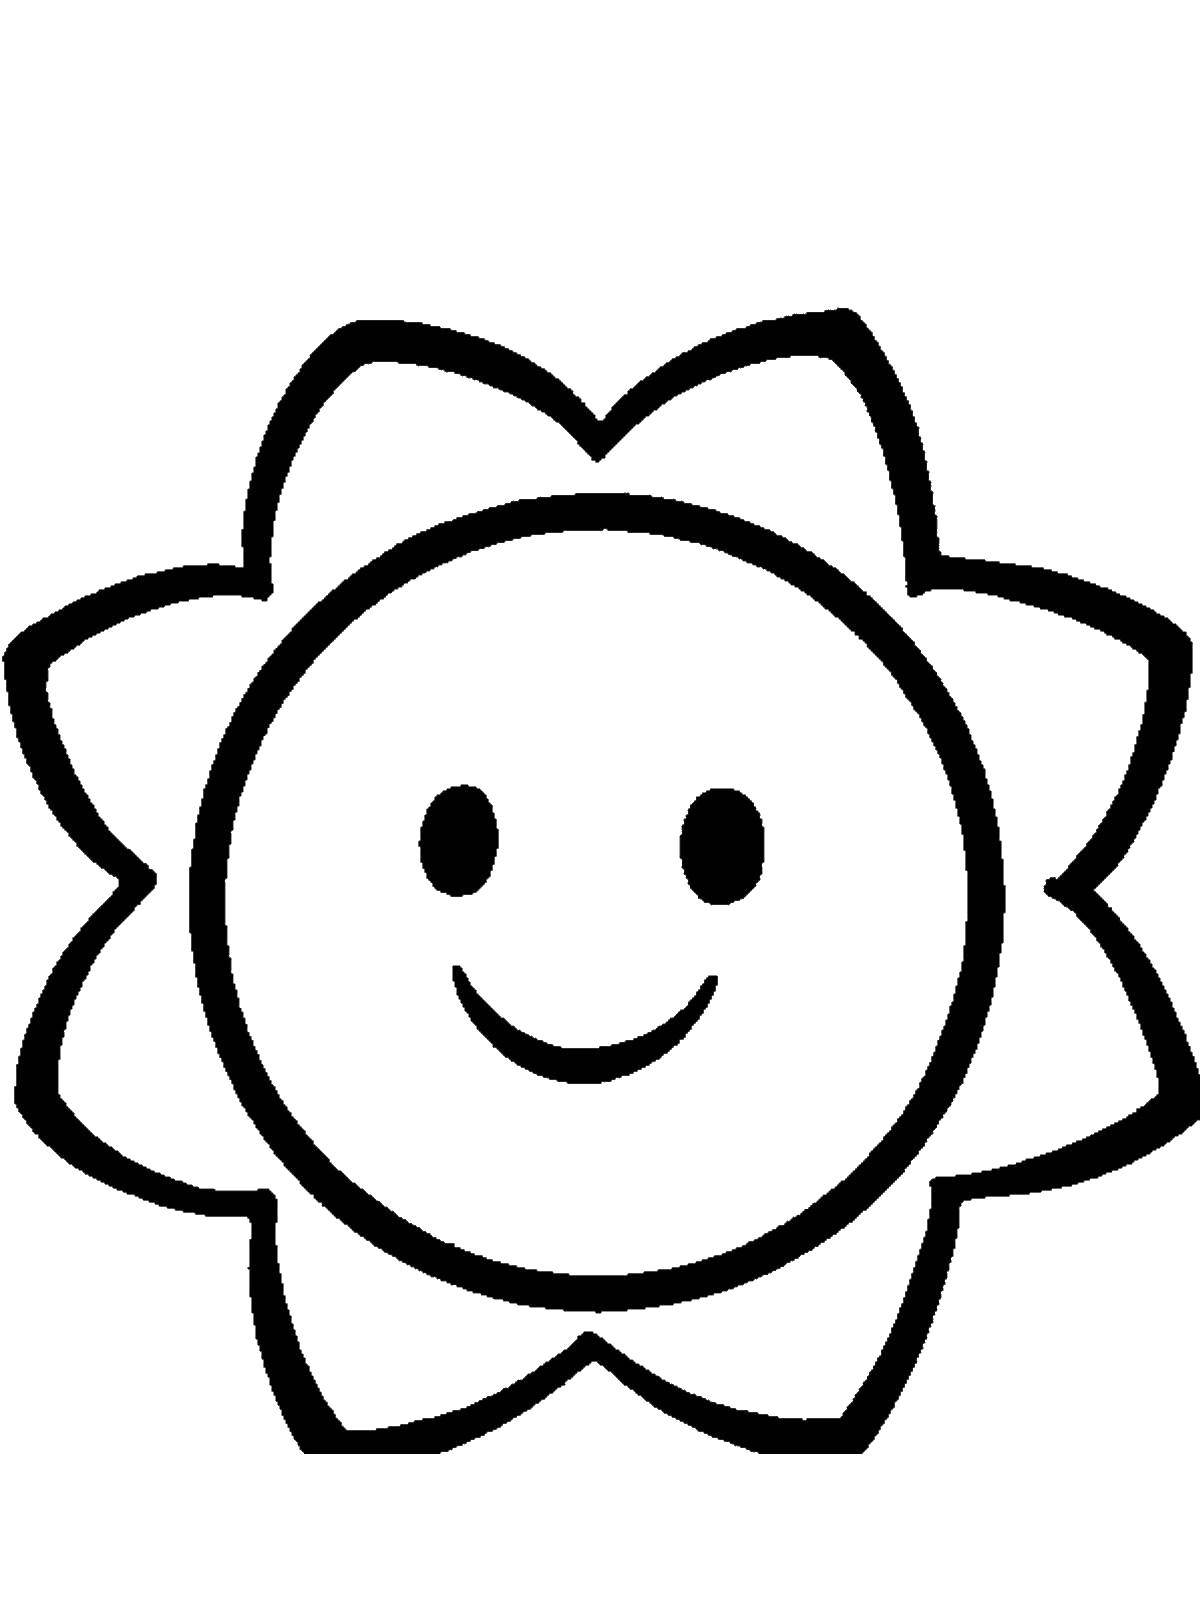 Coloring Flower. Category Coloring pages for kids. Tags:  Flowers.